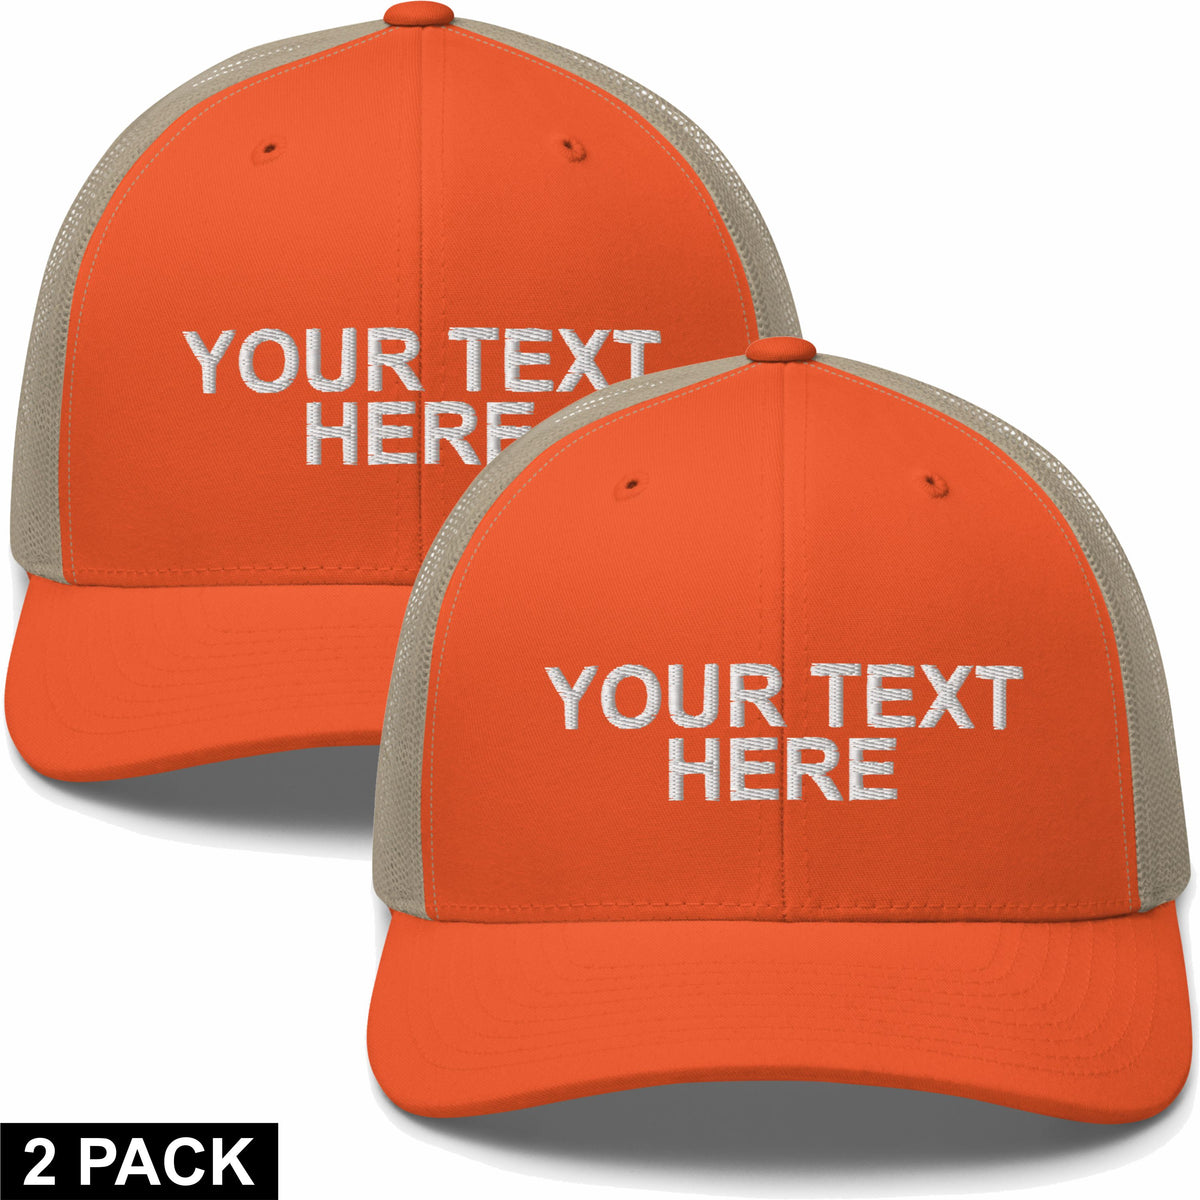 2 Embroidered Hats -Your Text Here - Words Only - Free Shipping